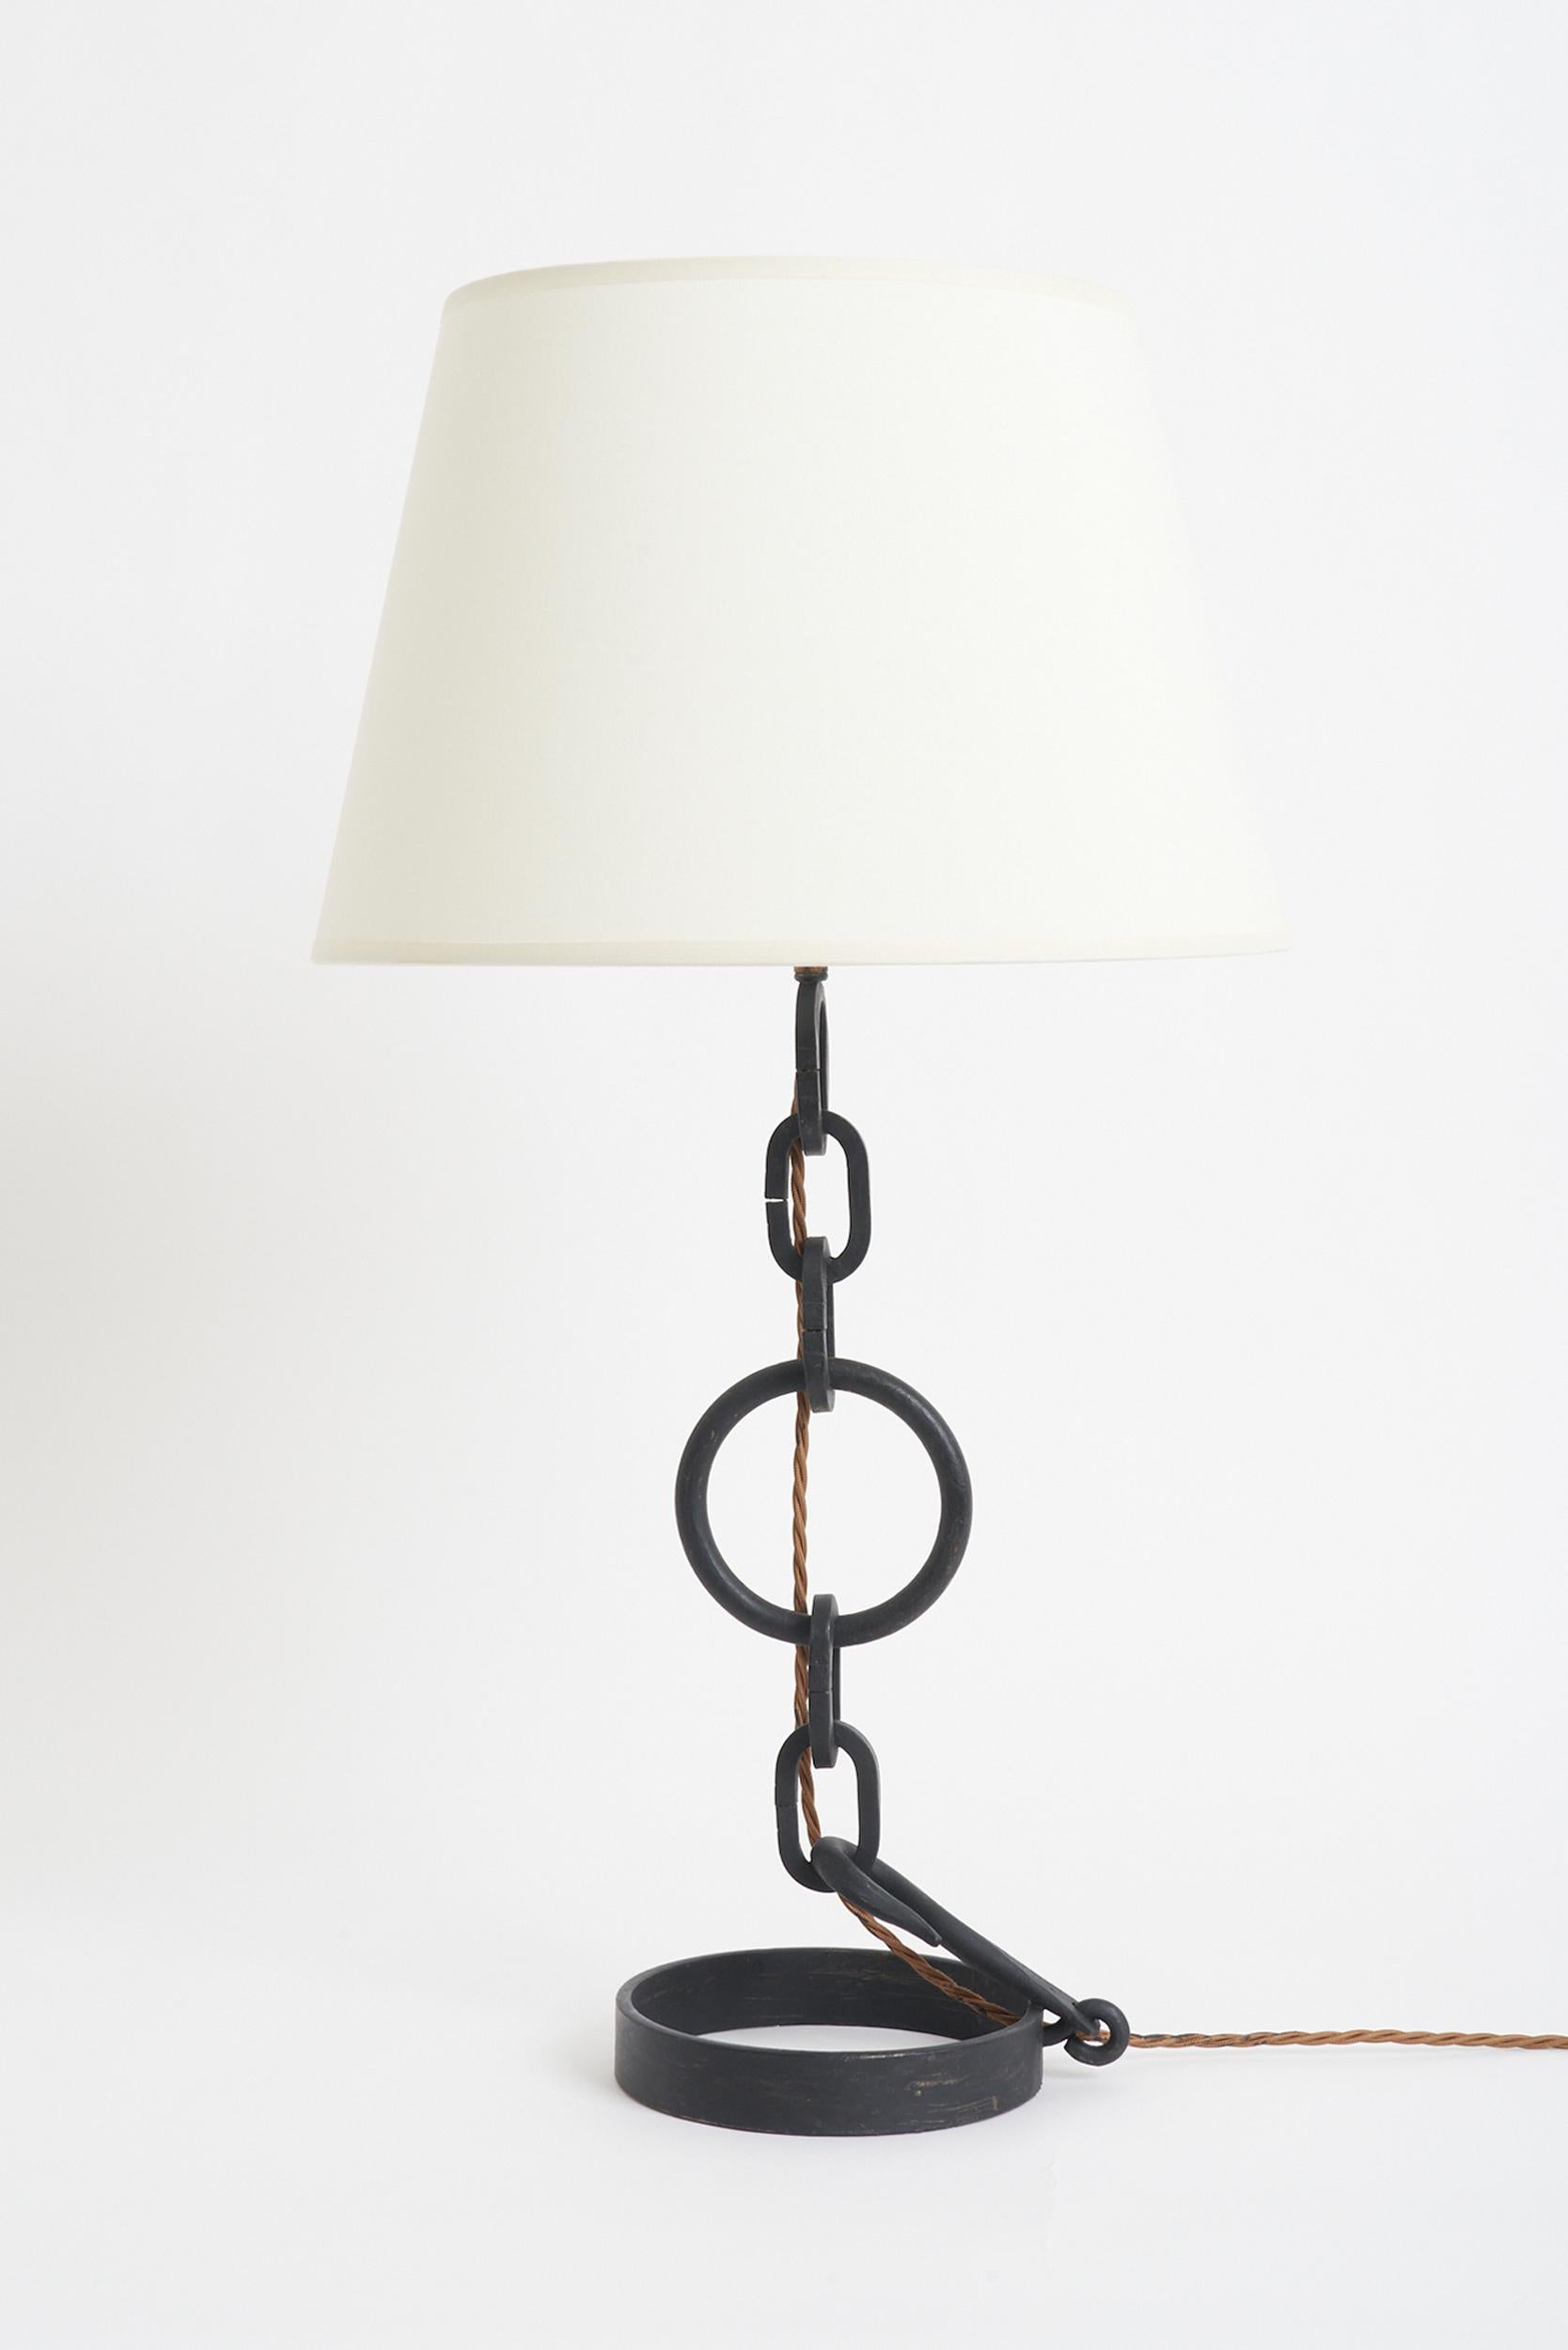 A black patinated chain link table lamp.
France, Mid-20th Century. 
Measures: With the shade: 68 cm high by 36 cm diameter. 
Lamp base only: 48 cm high by 16 cm diameter.